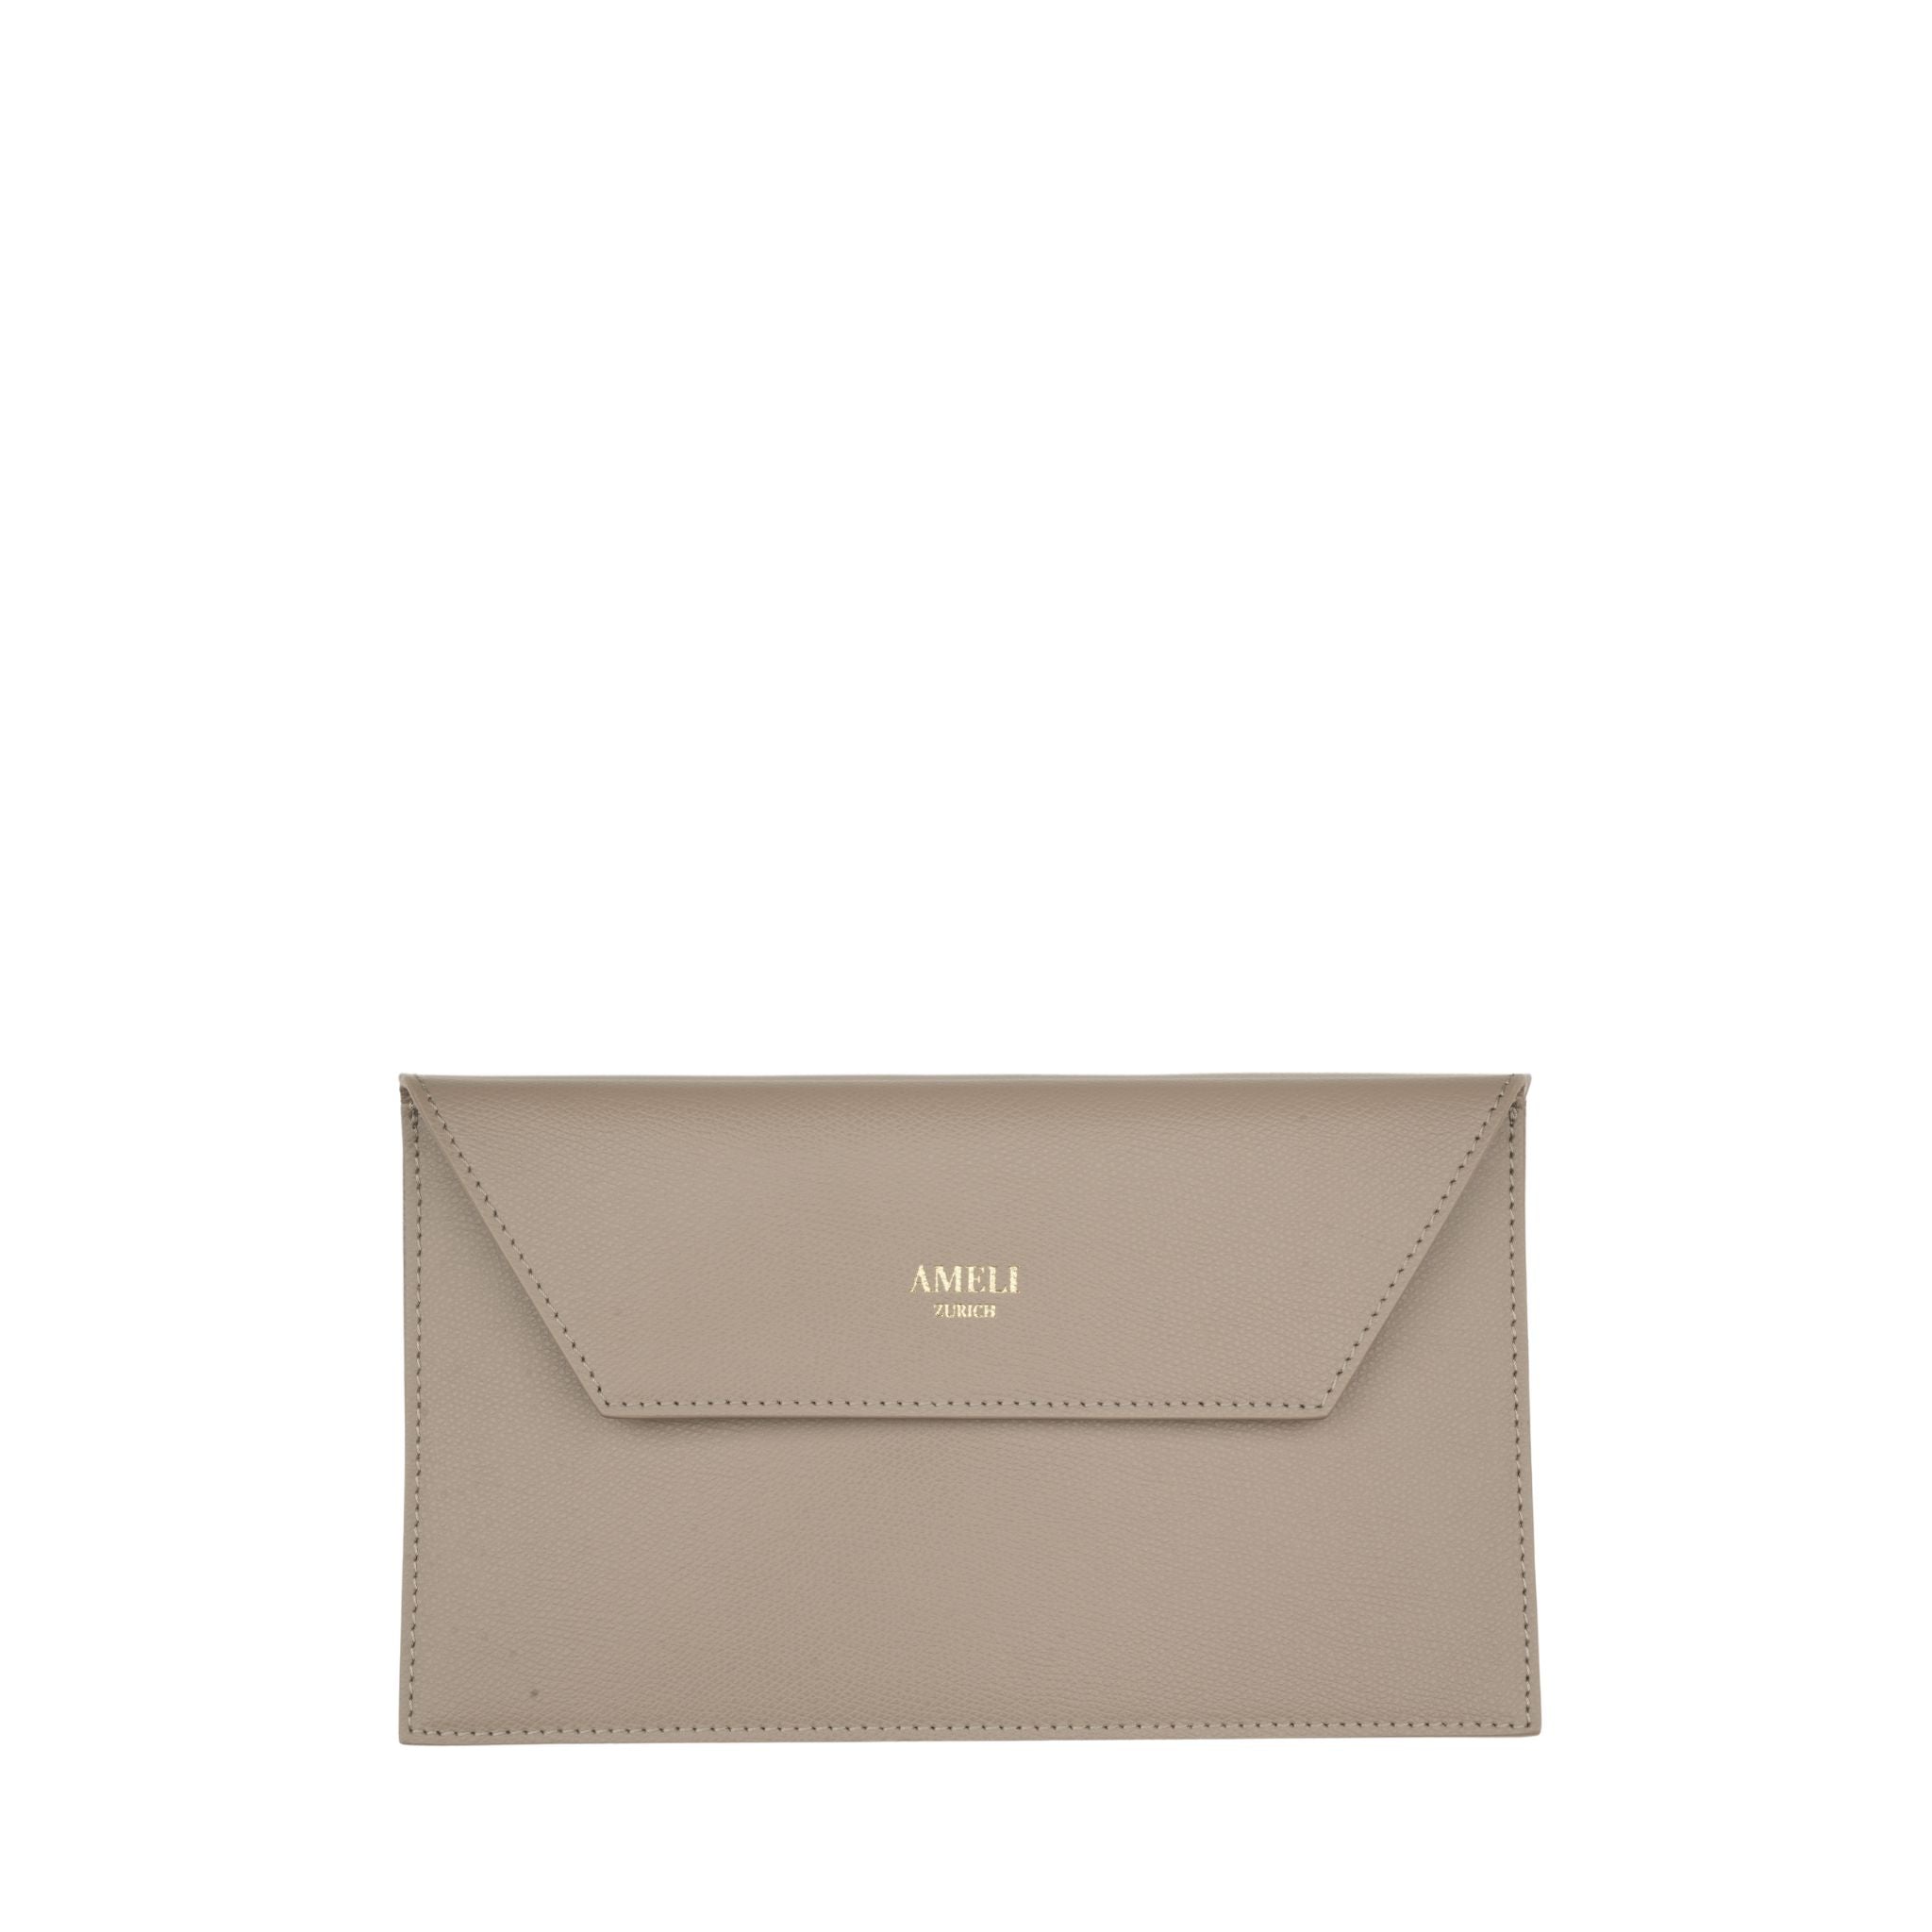 AMELI Zurich | Clutch | Cappuccino | Pebbled Leather | Front